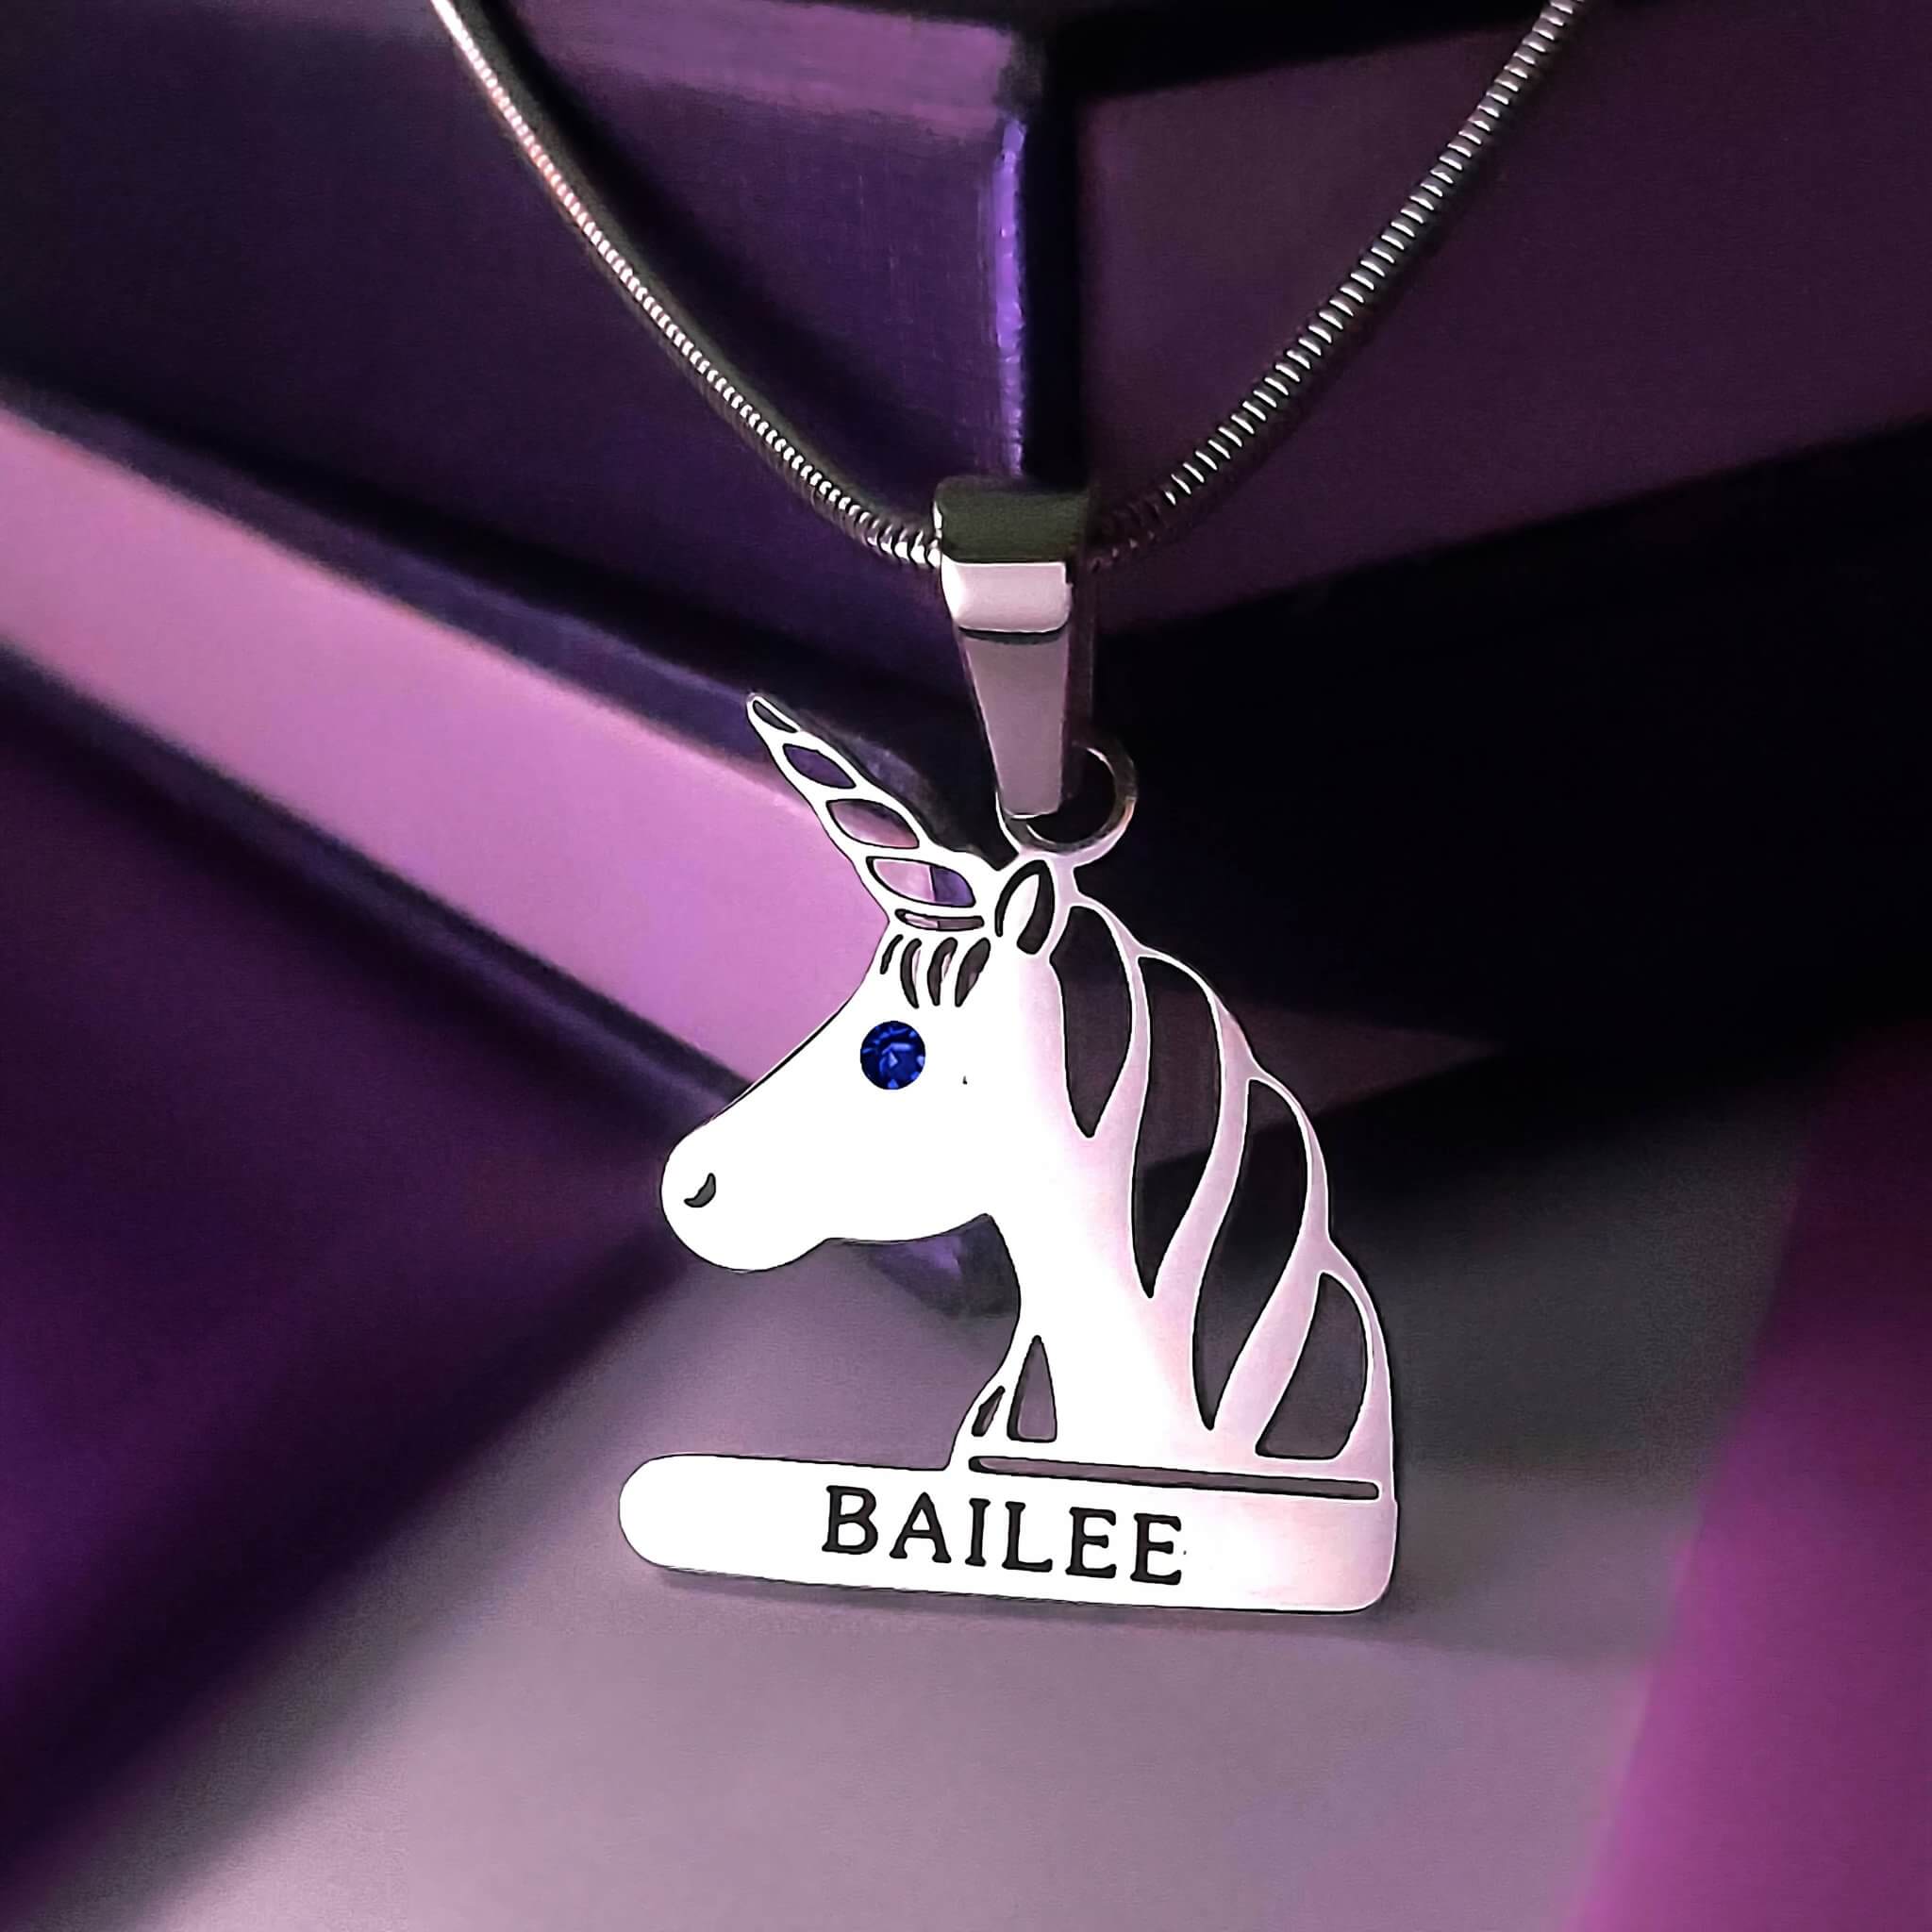 Unicorn Head Birthstone Name Necklace - Name Necklaces by Belle Fever